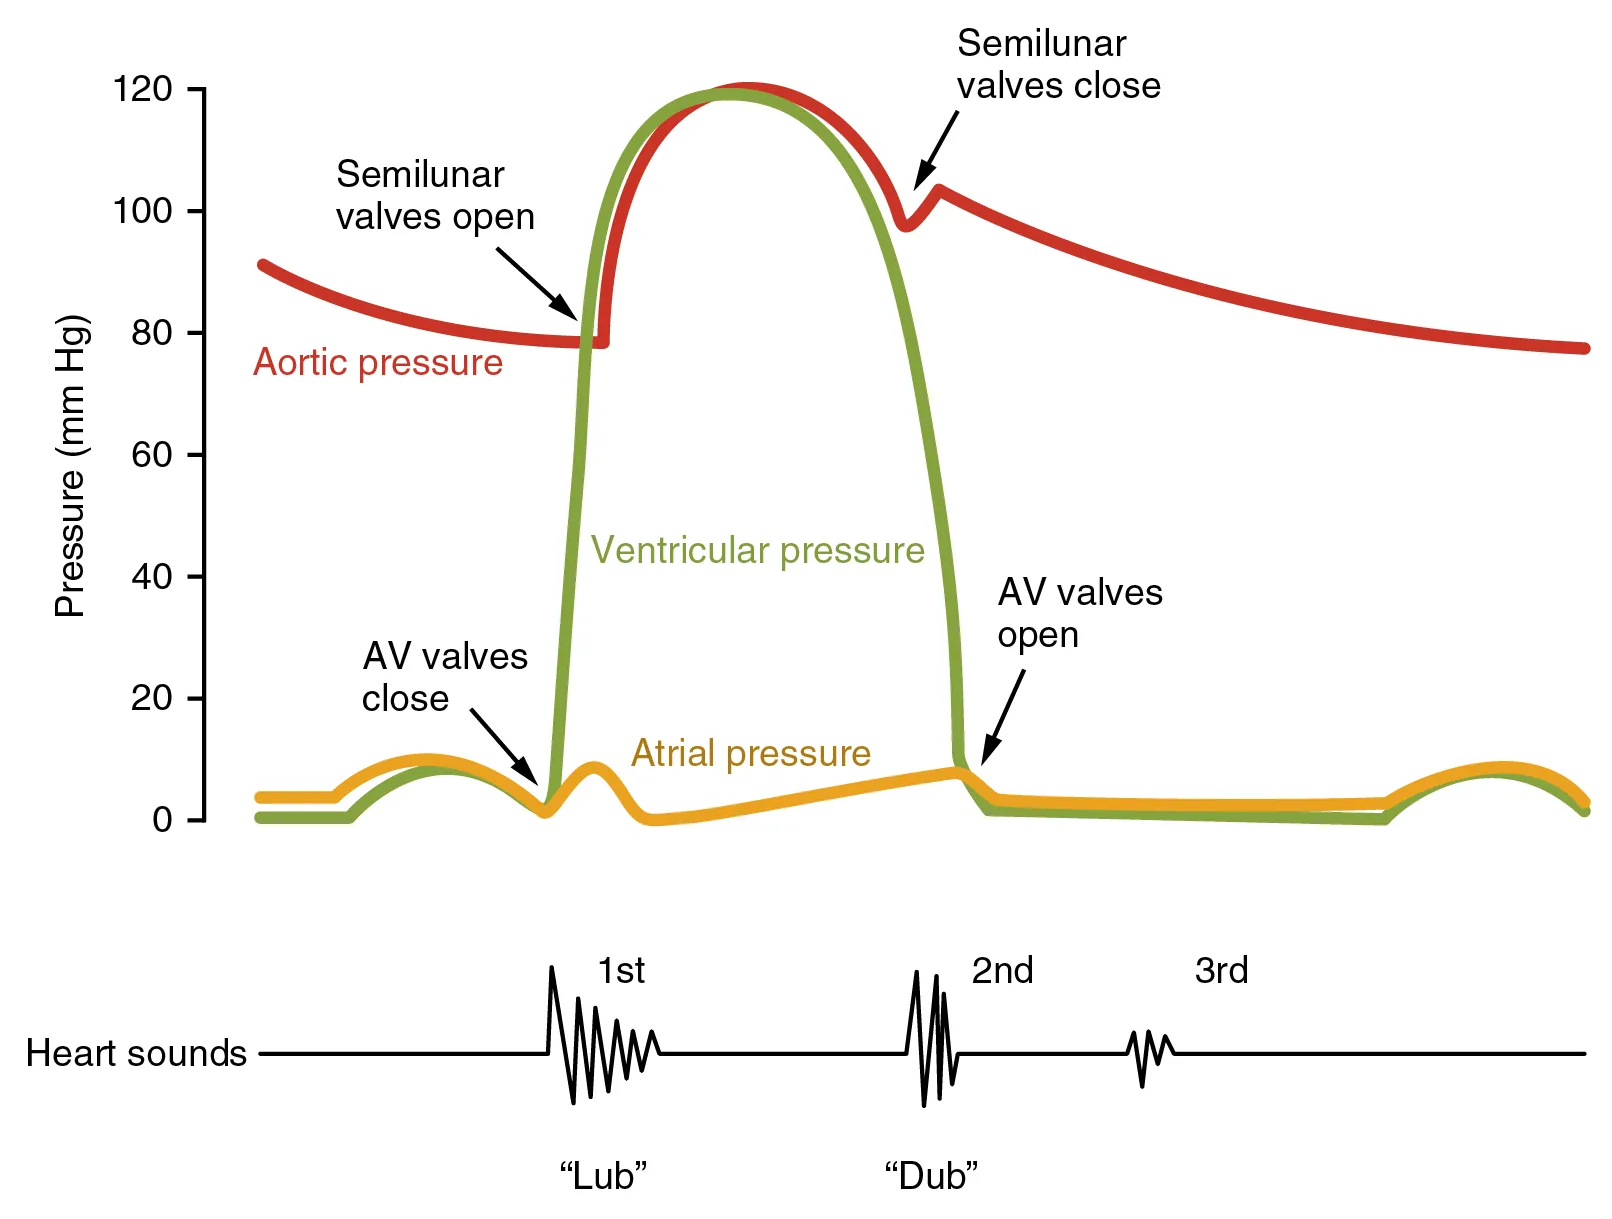 This image shows a graph of the blood pressure with the different stages labeled. Under the graph, a line shows the different sounds made by the beating heart.